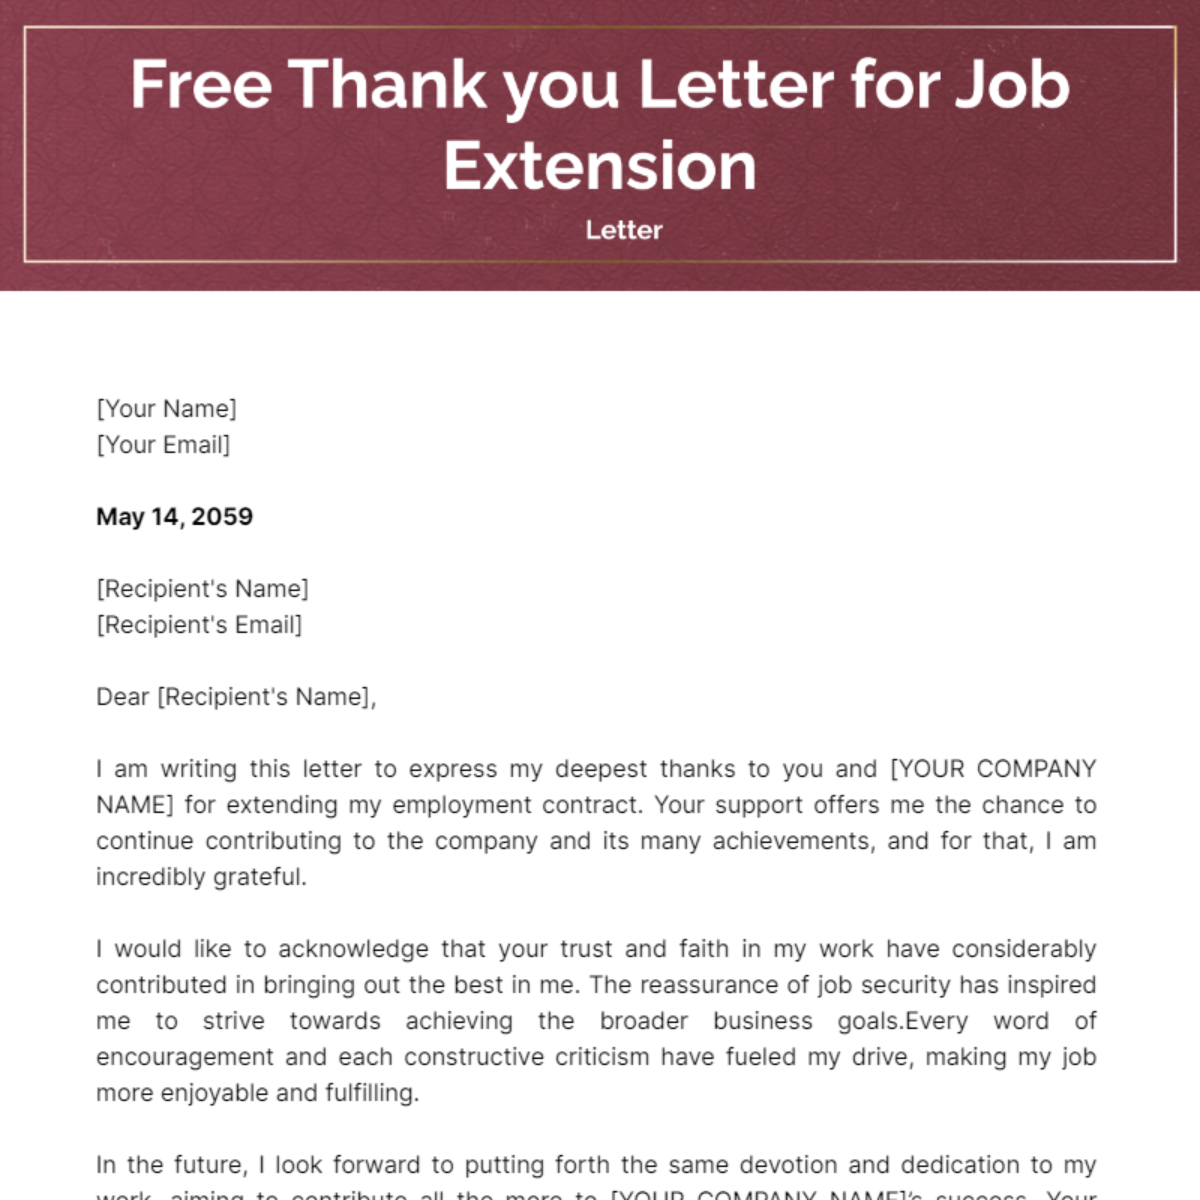 Thank you Letter for Job Extension Template